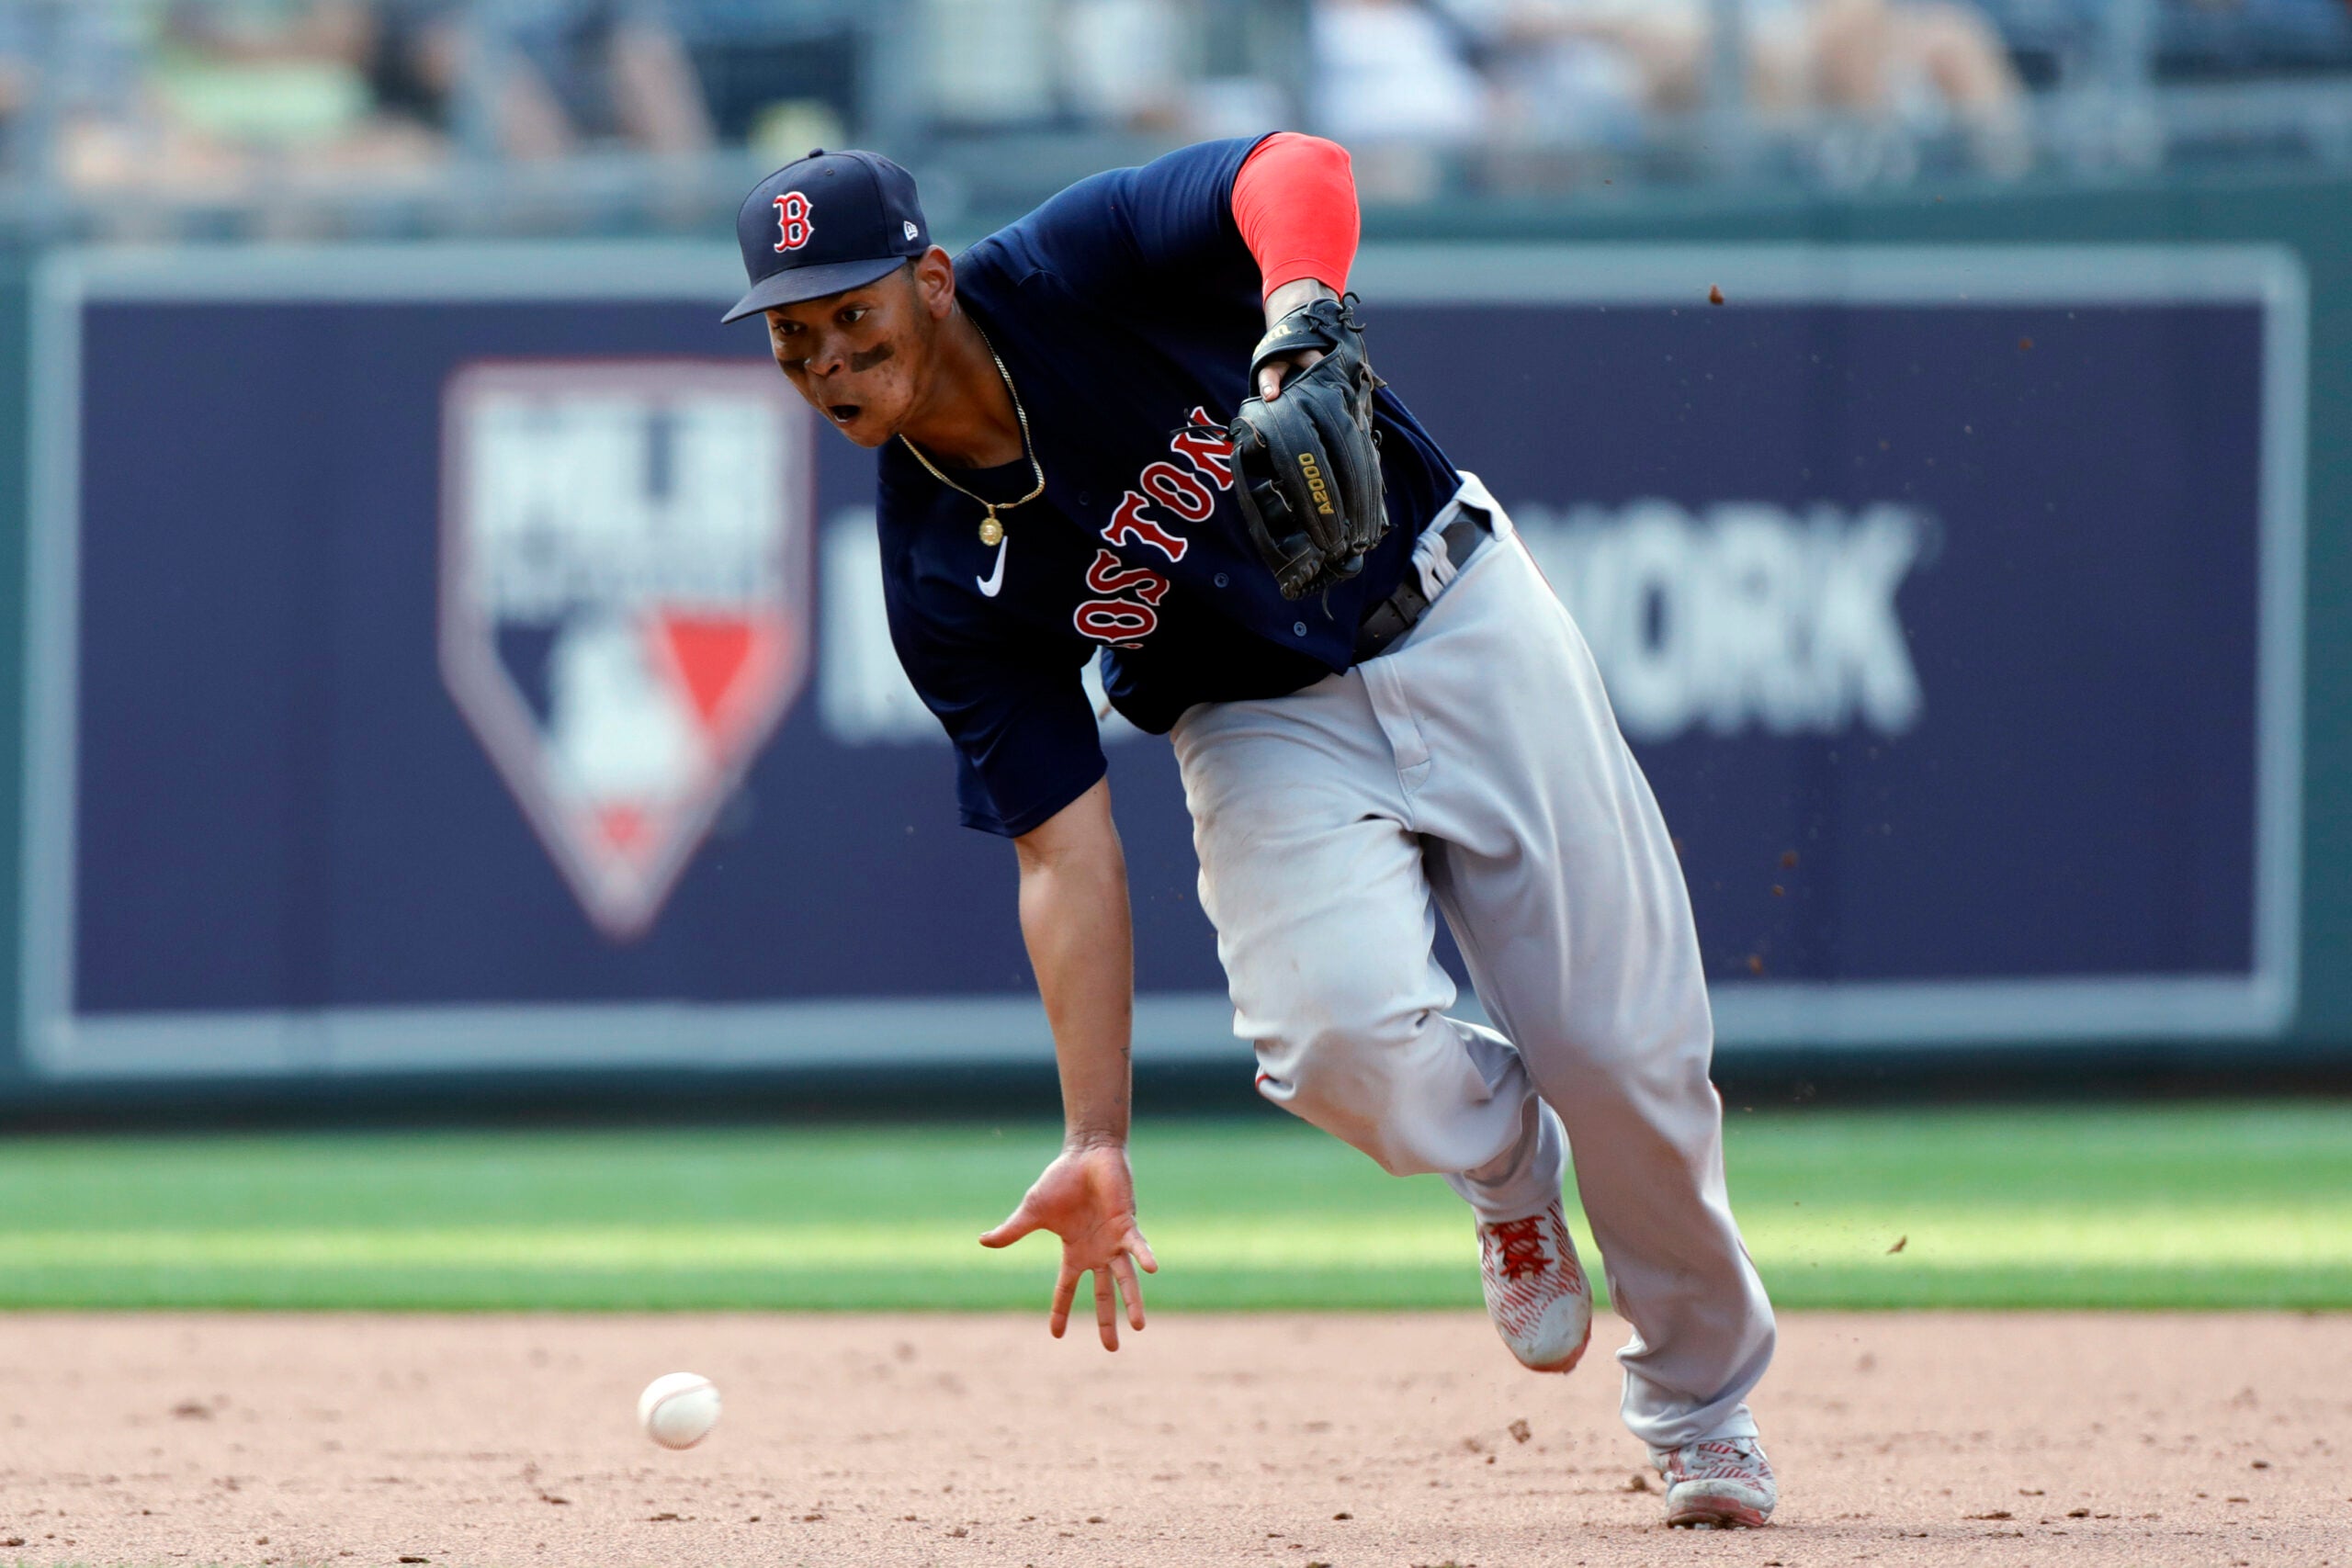 Red Sox fielding woes catching up with them as AL East race tightens